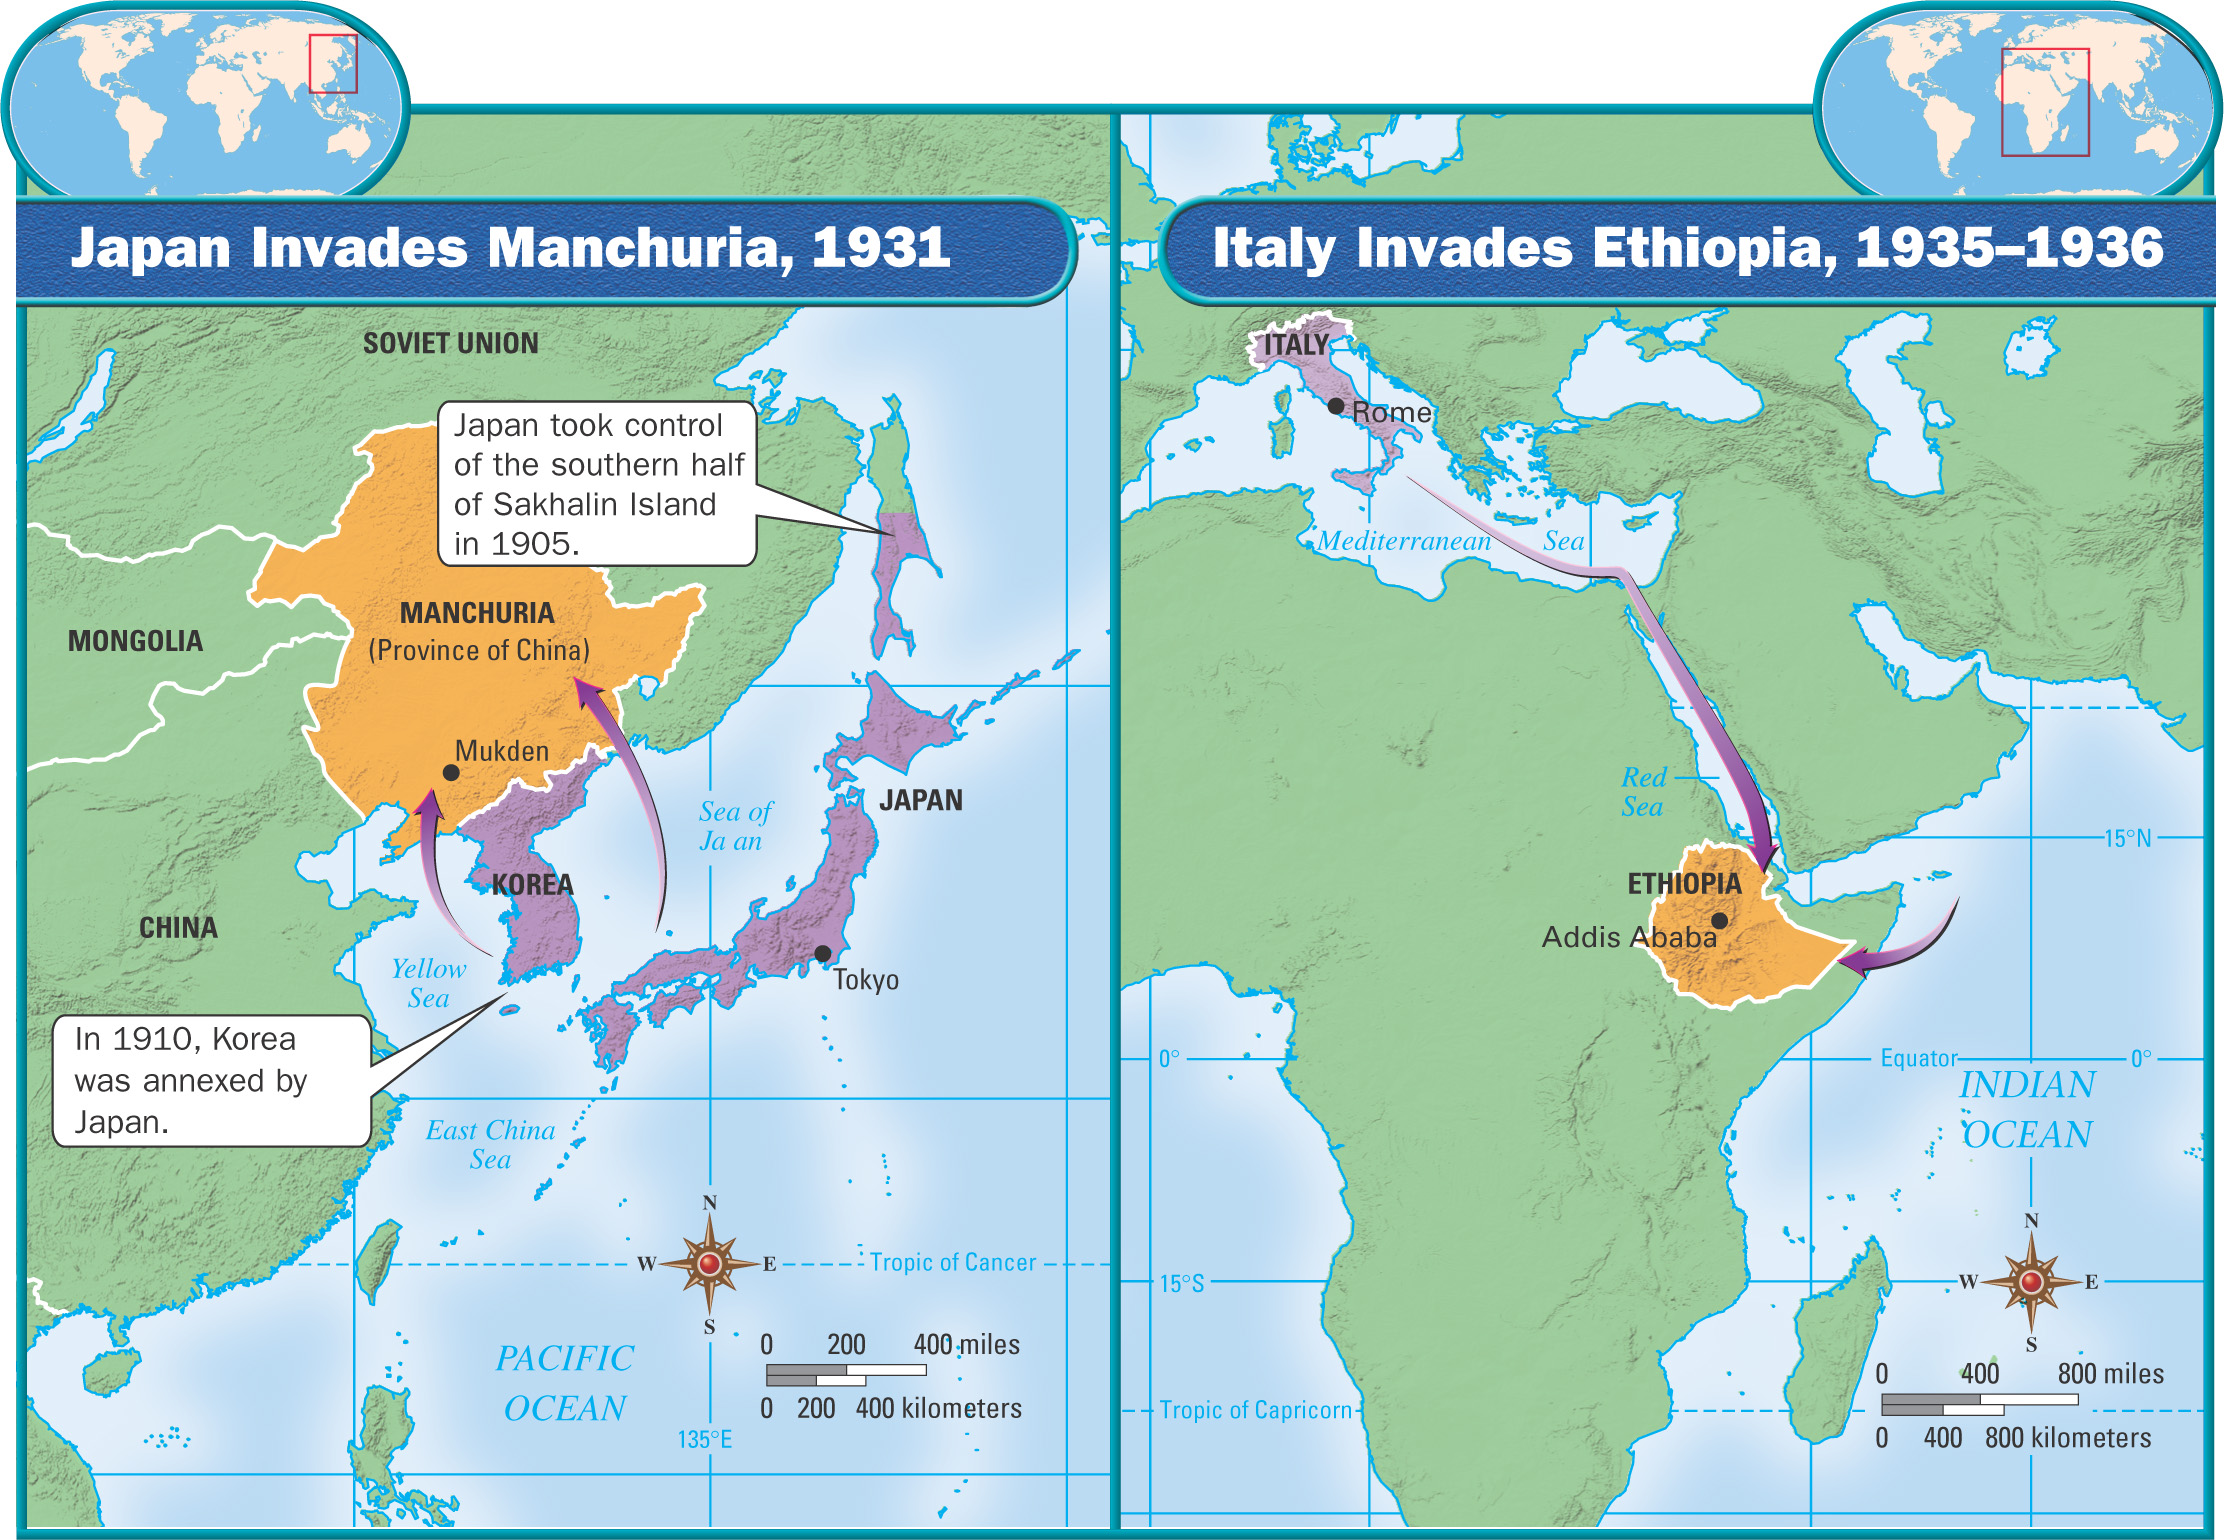 Two maps with labels: Japan Invades Manchuria 1931.  Arrows show Japan mounting its invasion through the Sea of Japan and the Yellow Sea.  Italy Invades Ethiopia 1935 - 1936. Arrows show Italy mounting its invasion through the Mediterranean Sea, the Red Sea, and the Indian Ocean.